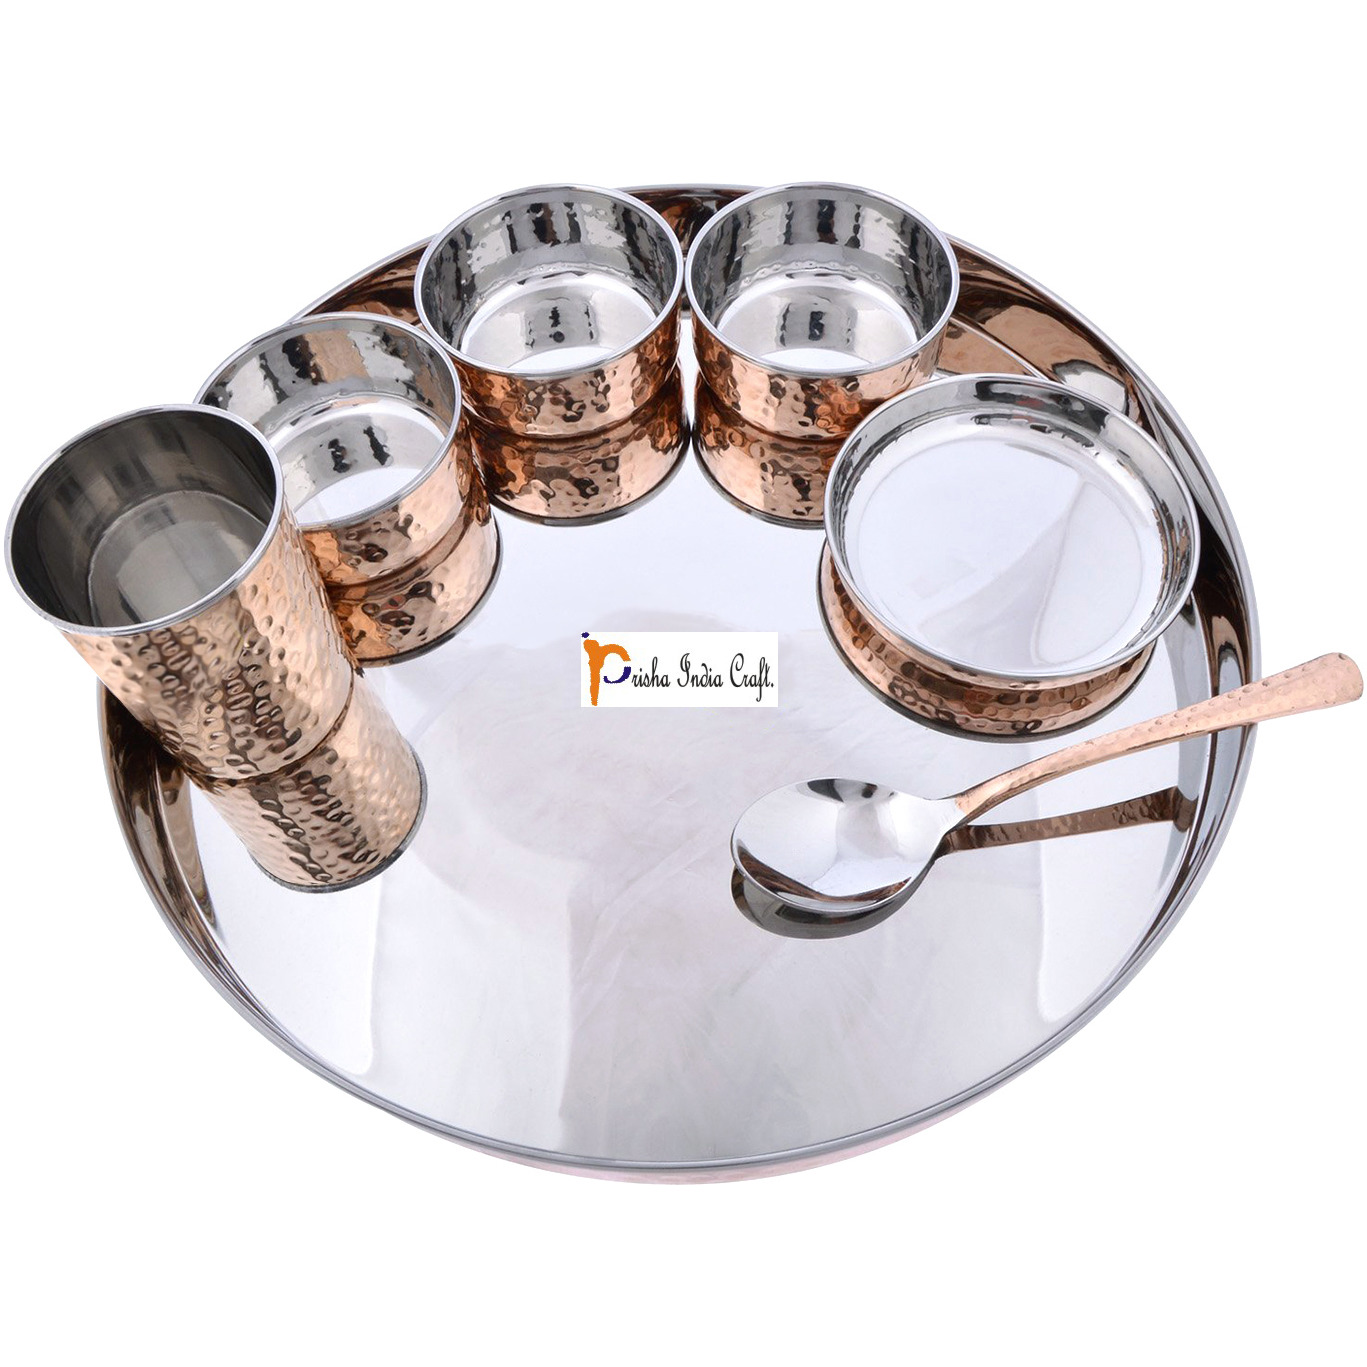 Prisha India Craft B. Set of 5 Dinnerware Traditional Stainless Steel Copper Dinner Set of Thali Plate, Bowls, Glass and Spoon, Dia 13  With 1 Luxury Style Stainless Steel Copper Pitcher Jug - Christmas Gift